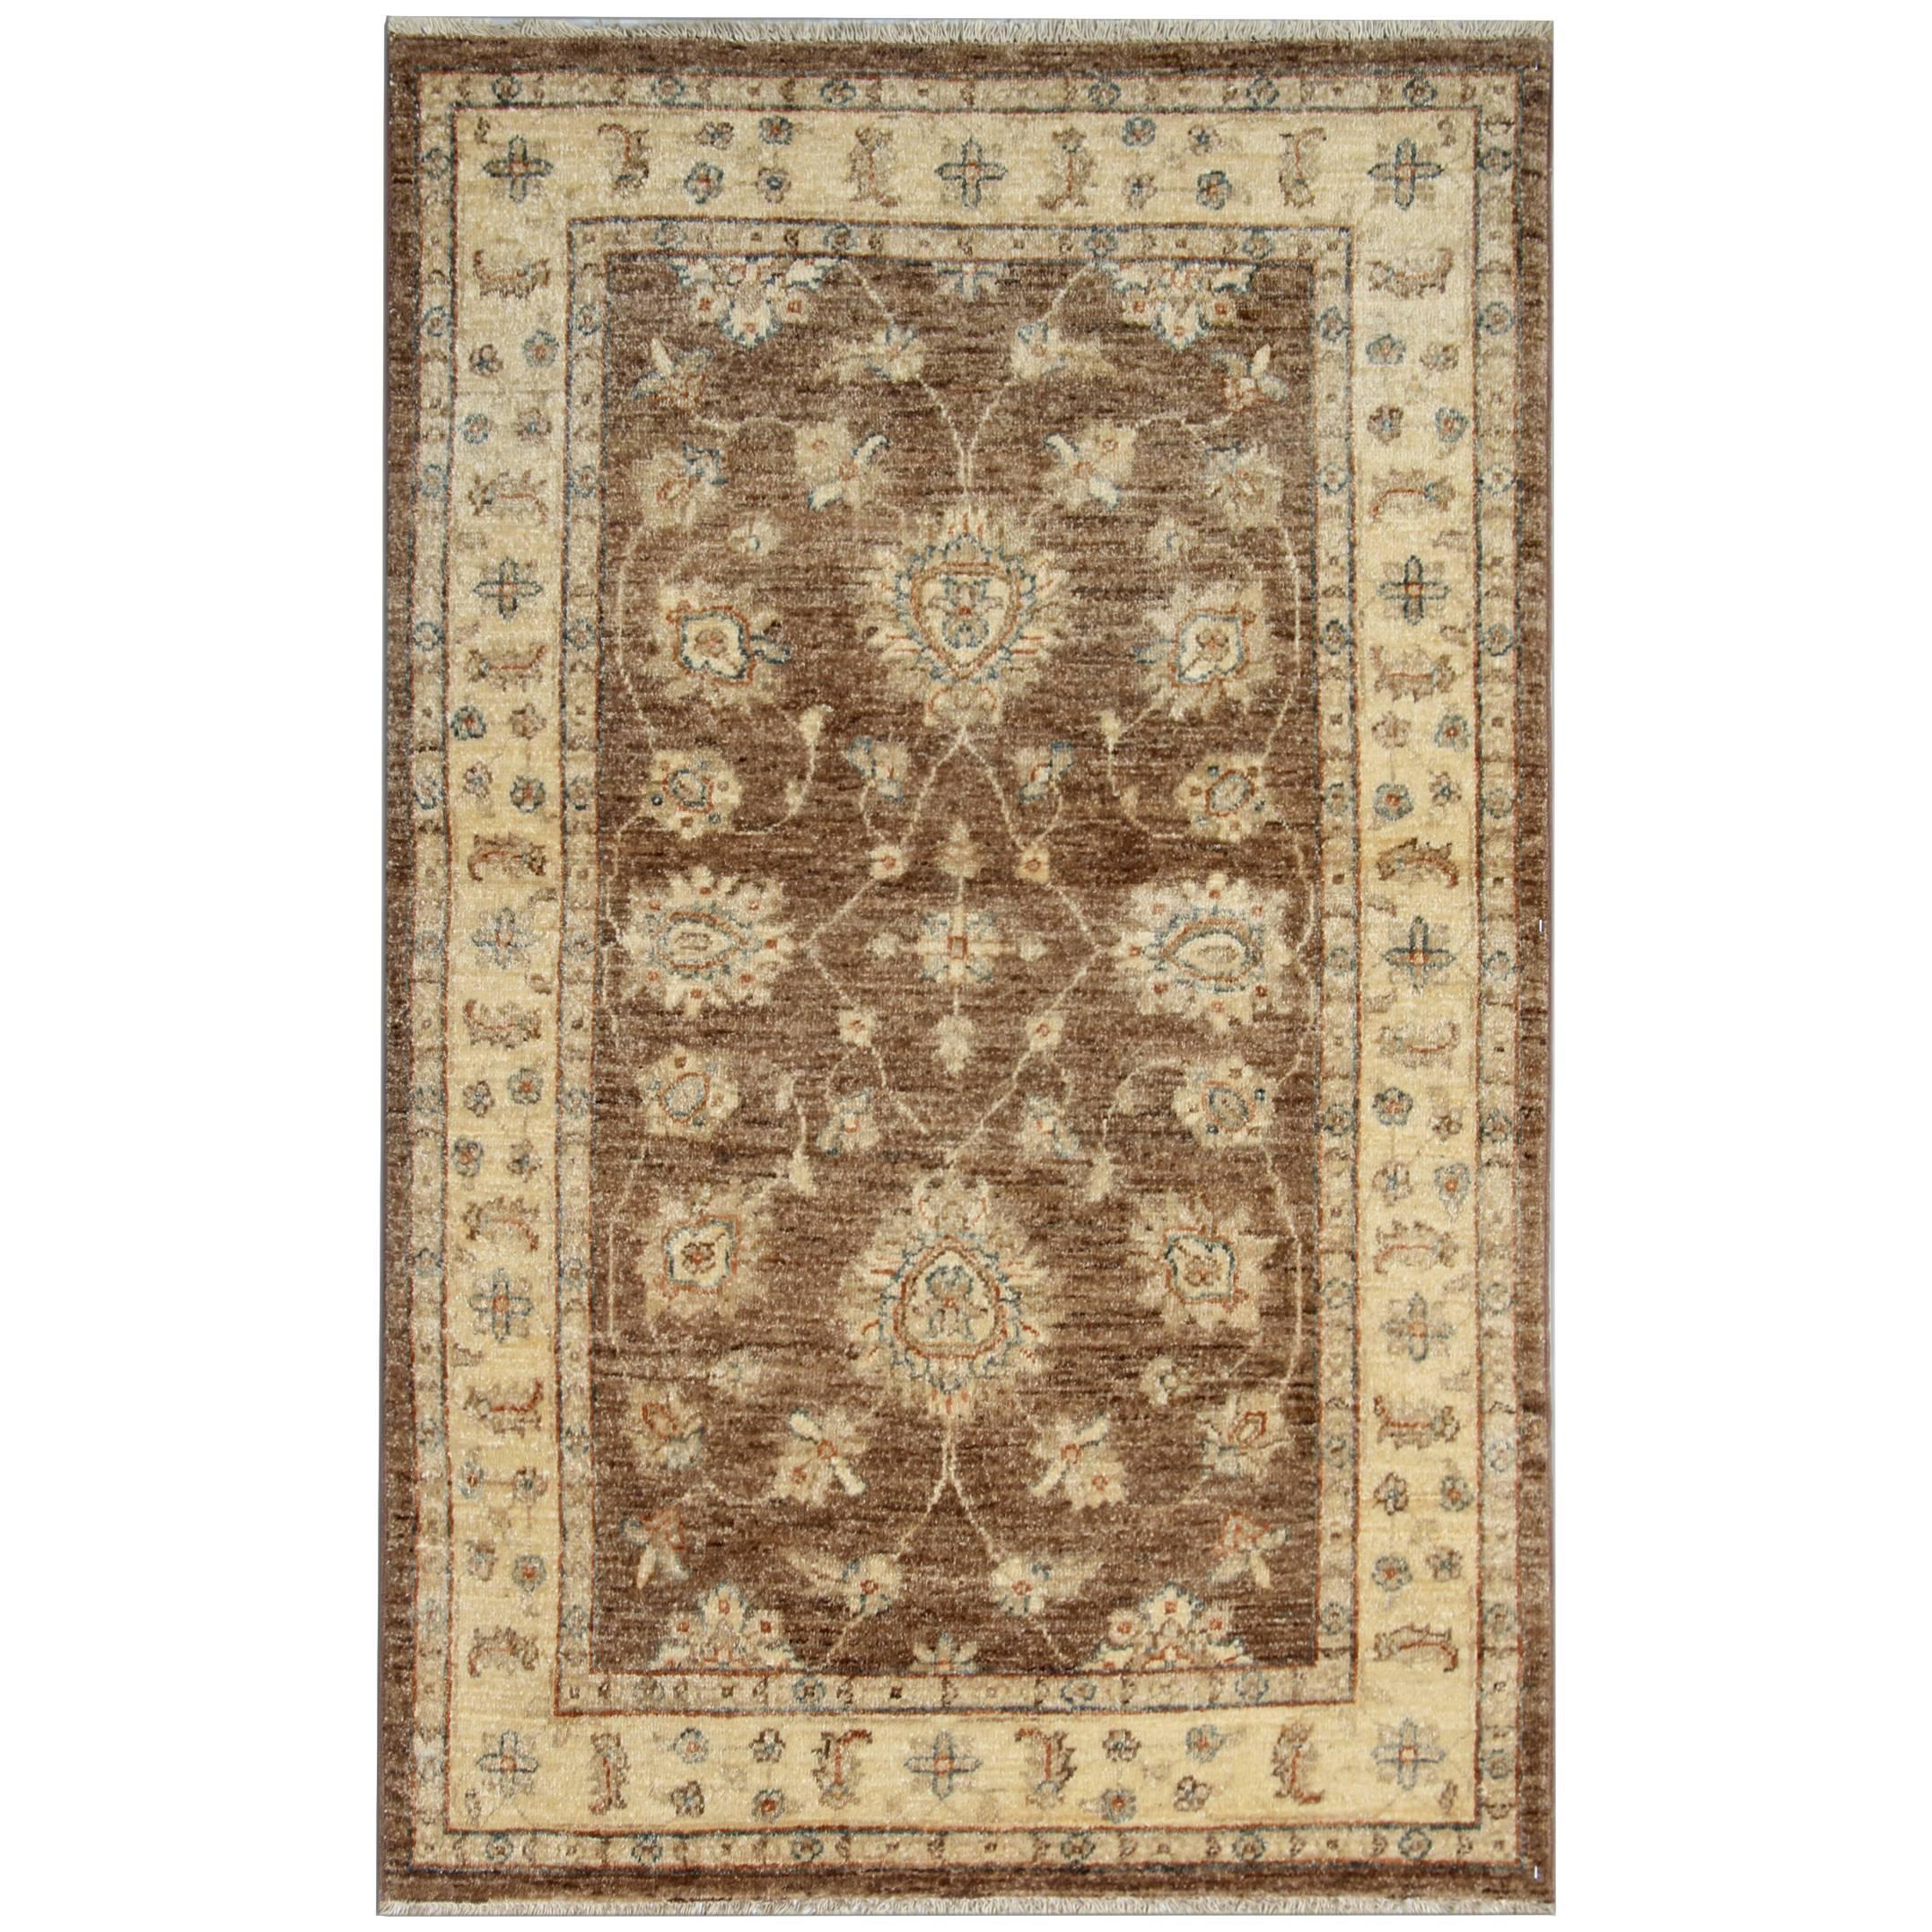 Brown Rug Hand Made Carpet Living room Rugs, with Oriental Rugs Design For Sale